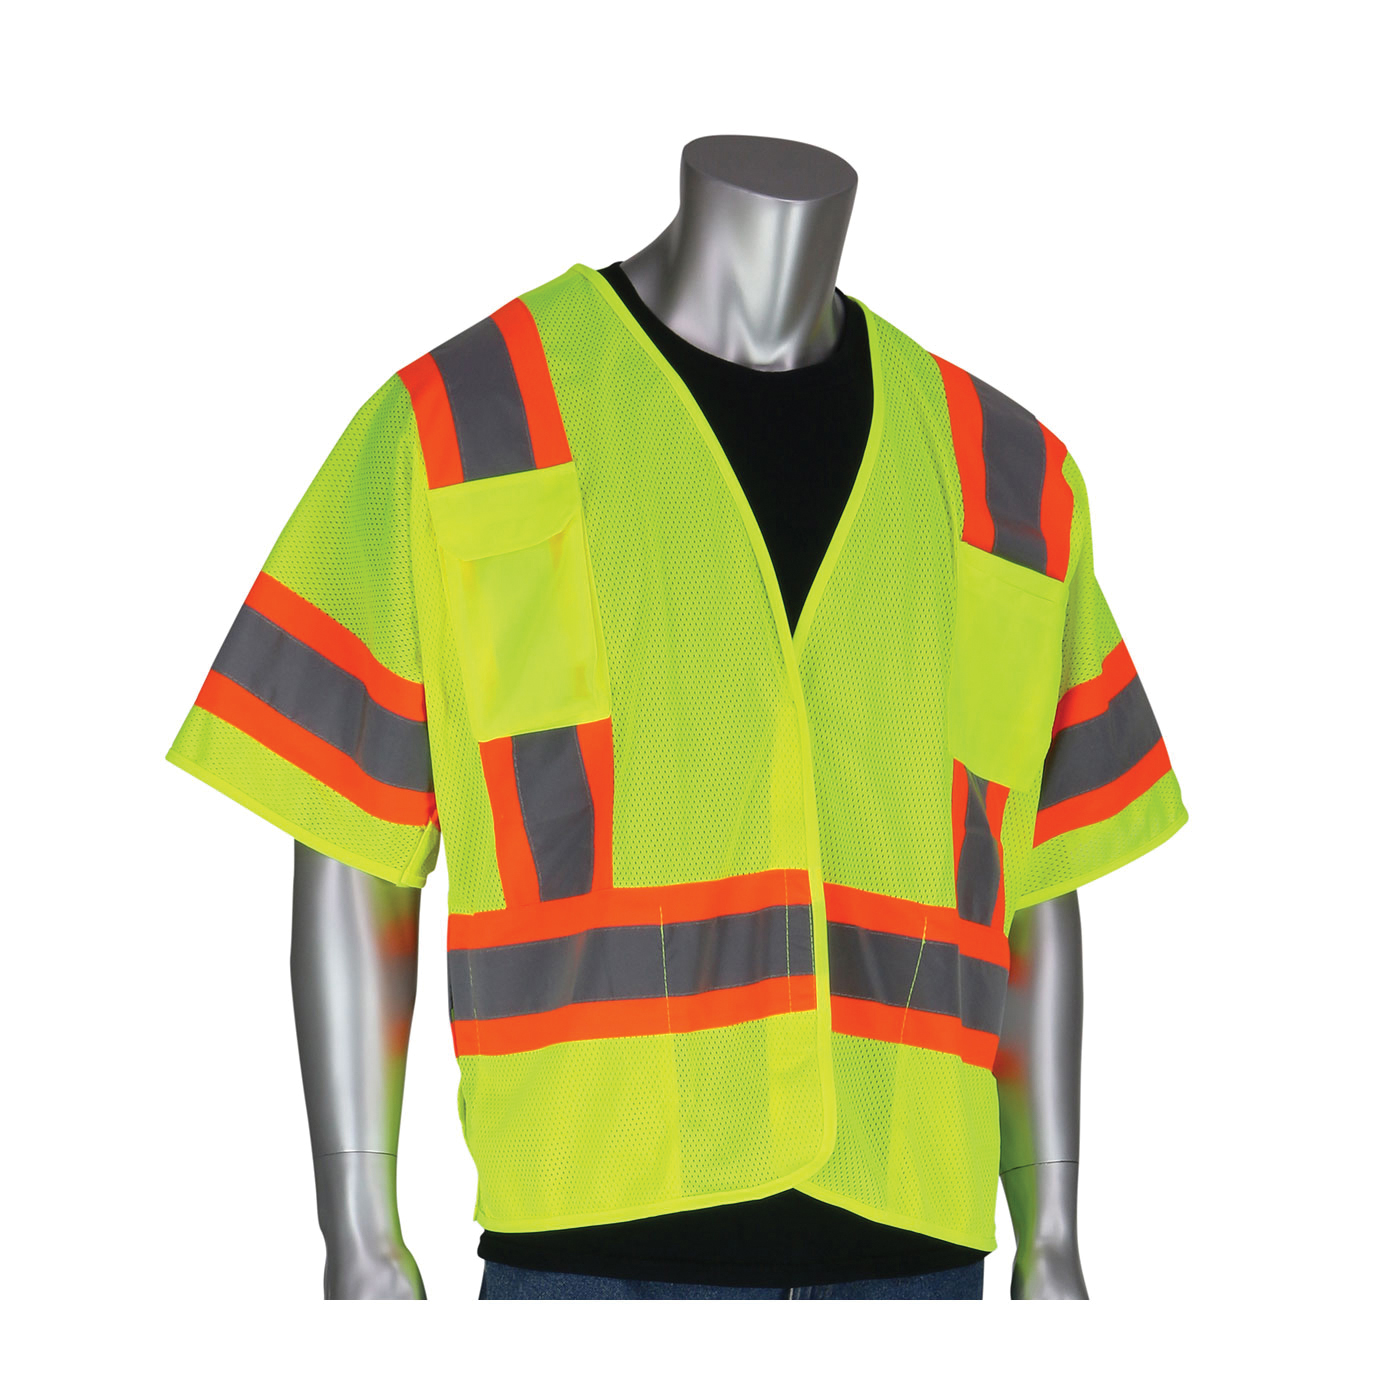 PIP® 303-5PMTT-LY/2X 2-Tone Safety Vest, 2XL, Hi-Viz Lime Yellow, Polyester Mesh, Hook and Loop Closure, 4 Pockets, ANSI Class: Class 3, Specifications Met: ANSI 107 Type R